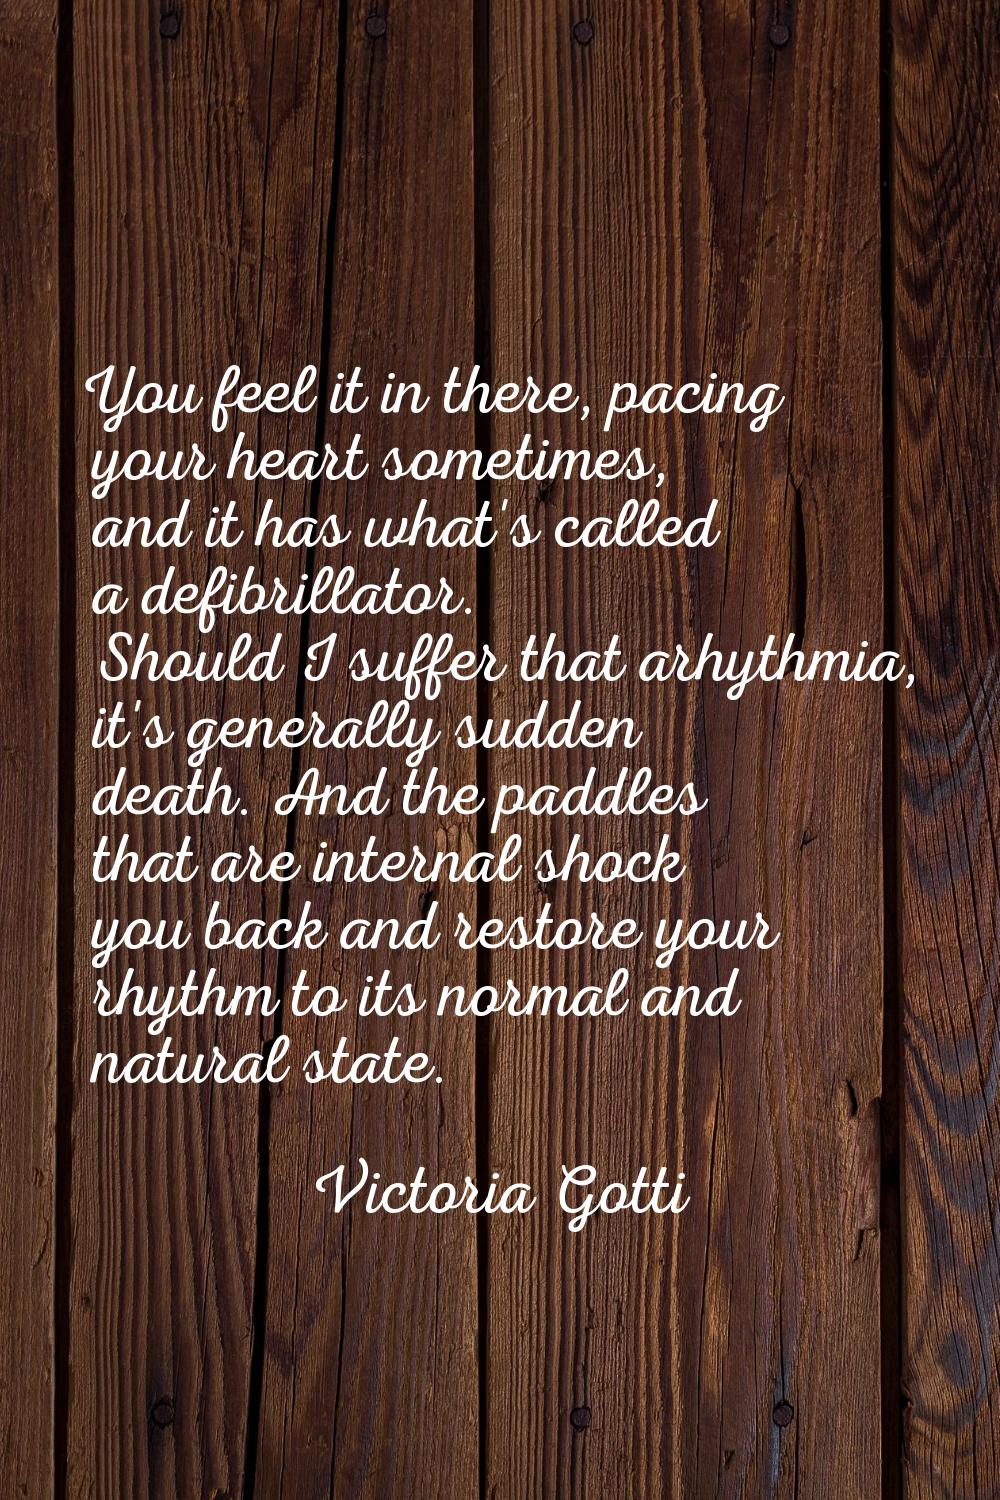 You feel it in there, pacing your heart sometimes, and it has what's called a defibrillator. Should